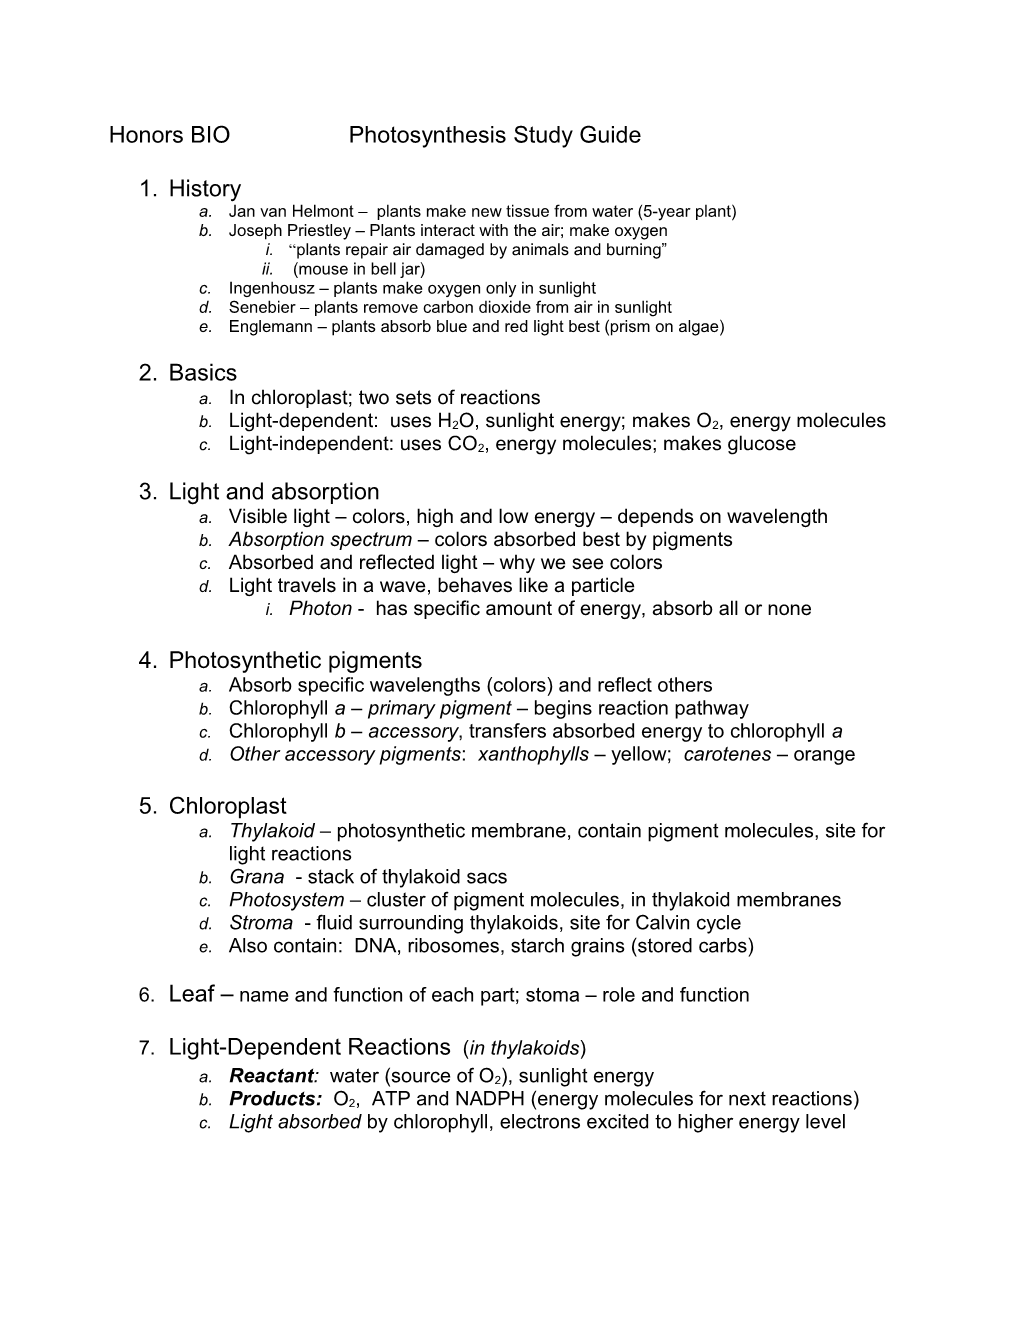 Study Guide for Photosynthesis